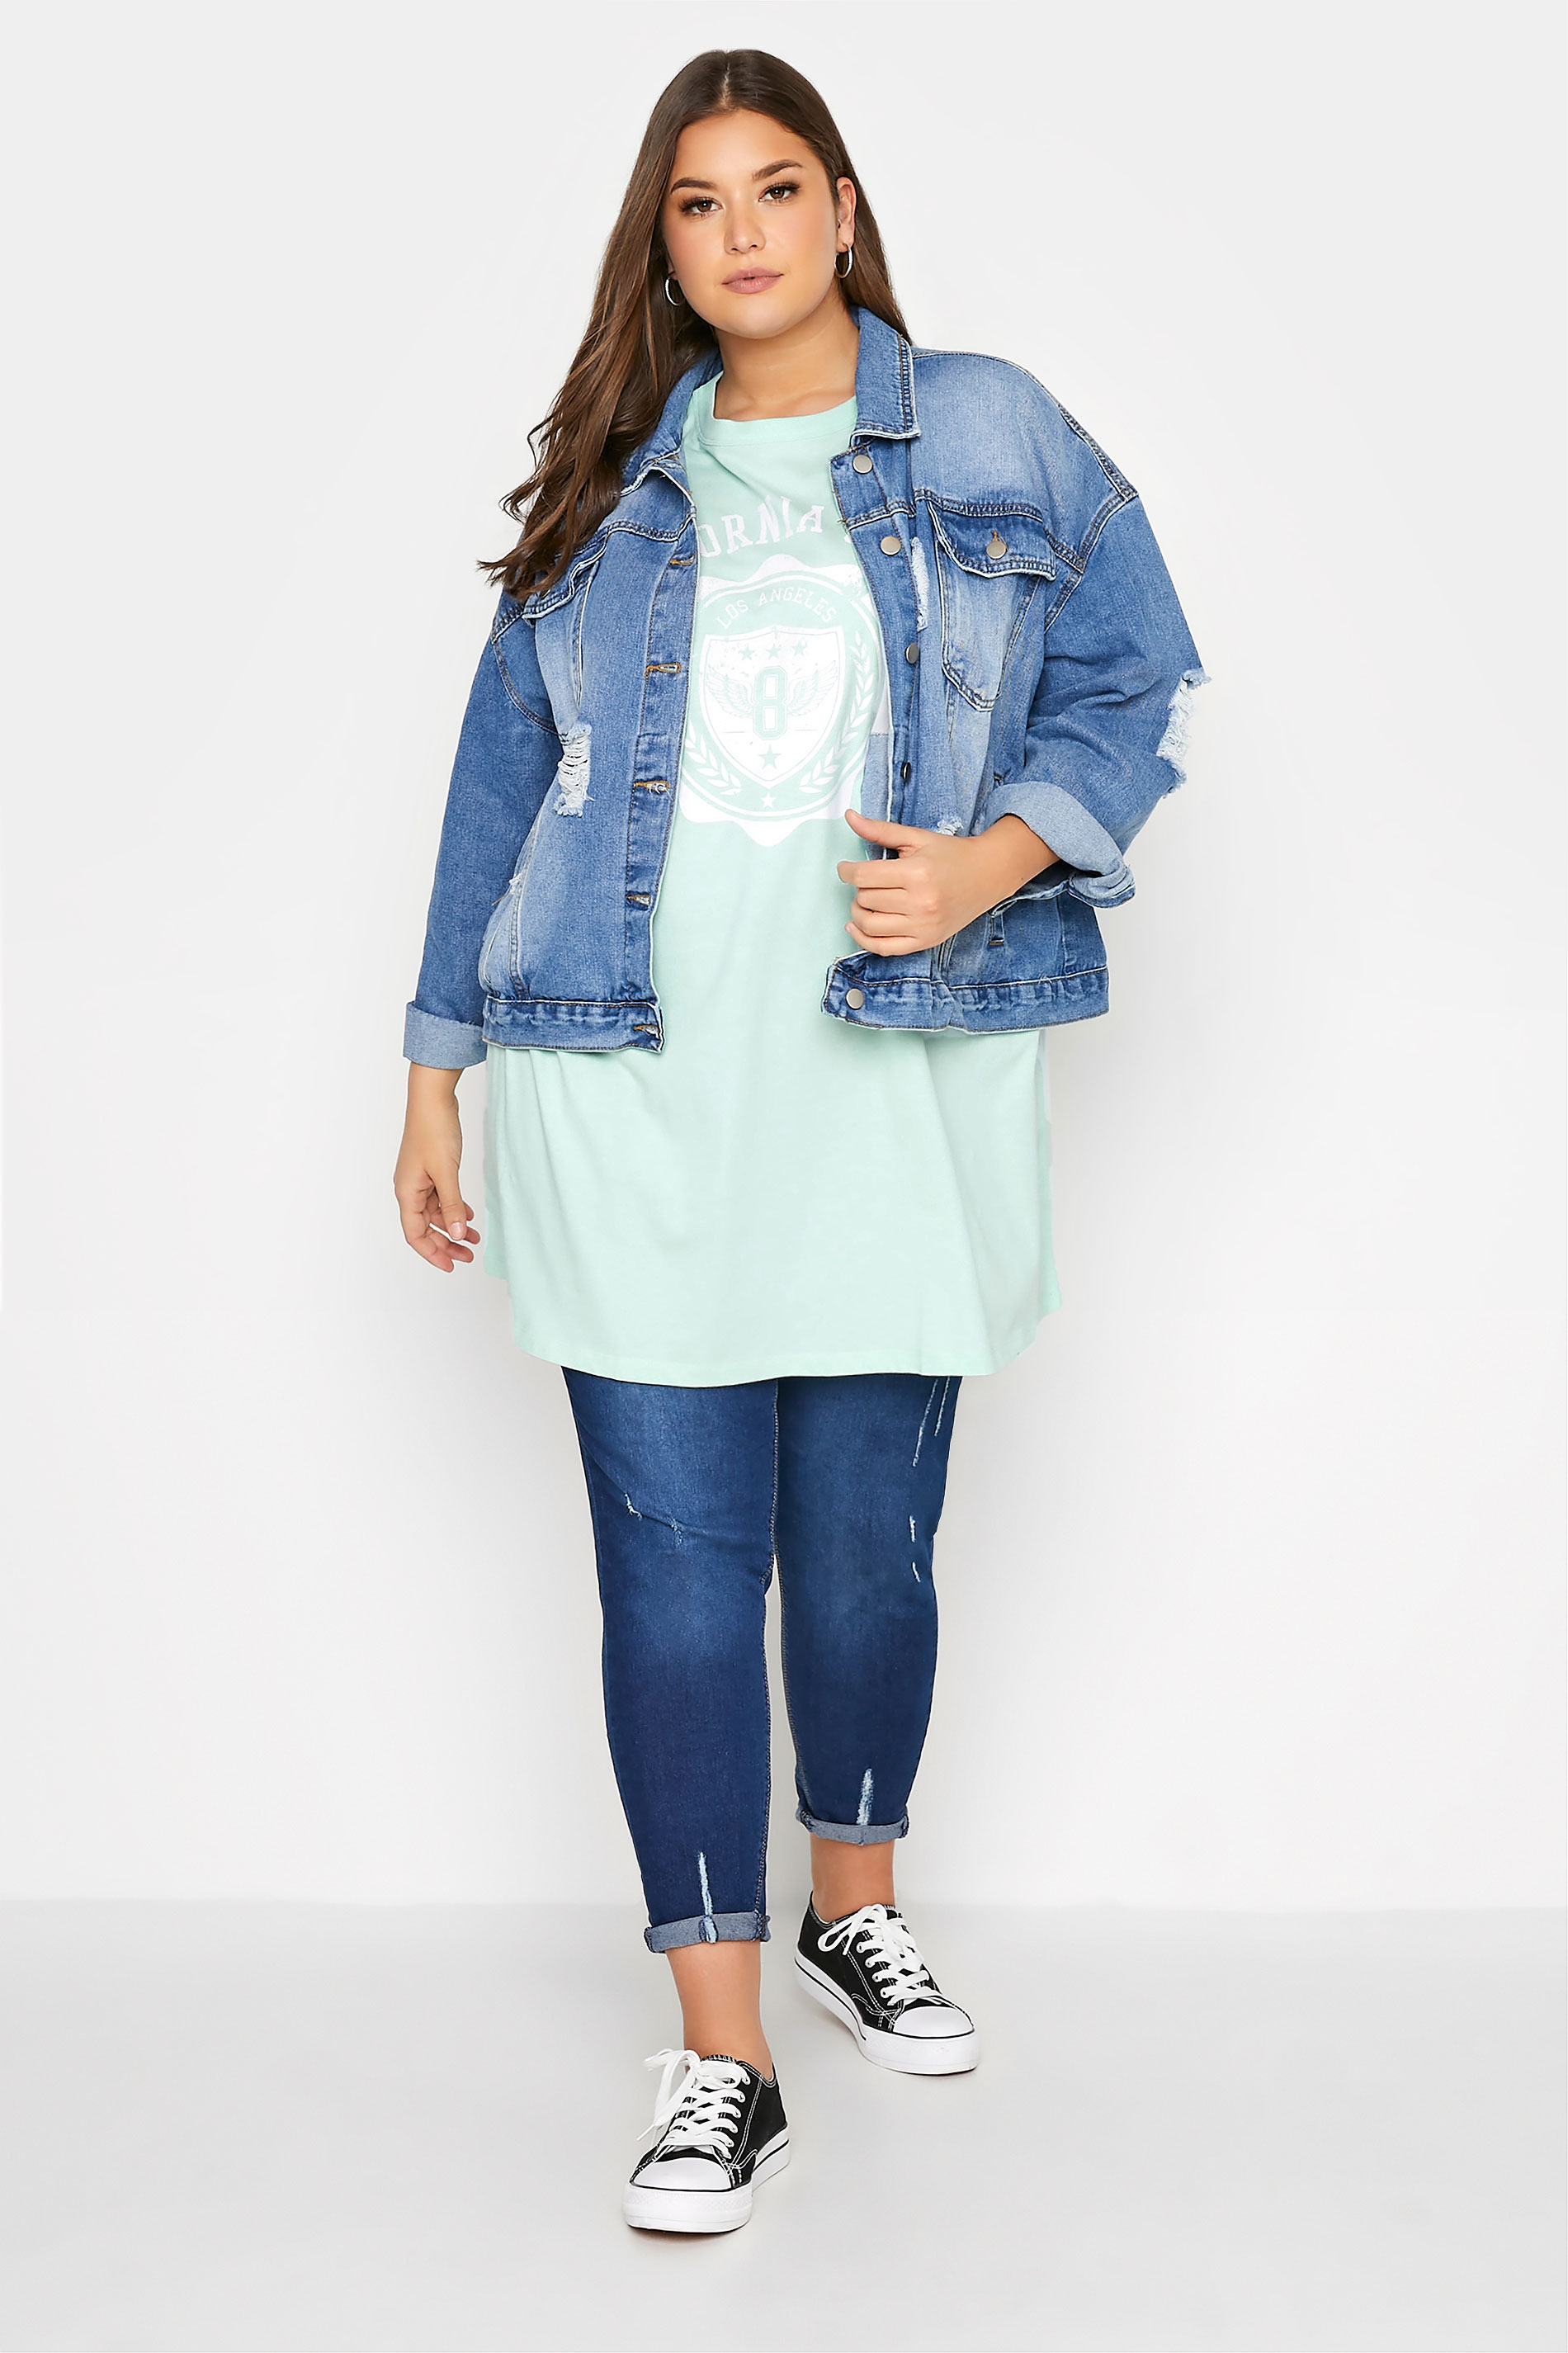 Grande taille  Tops Grande taille  T-Shirts | Tunique Verte Menthe 'California State' Manches Courtes - GS52882